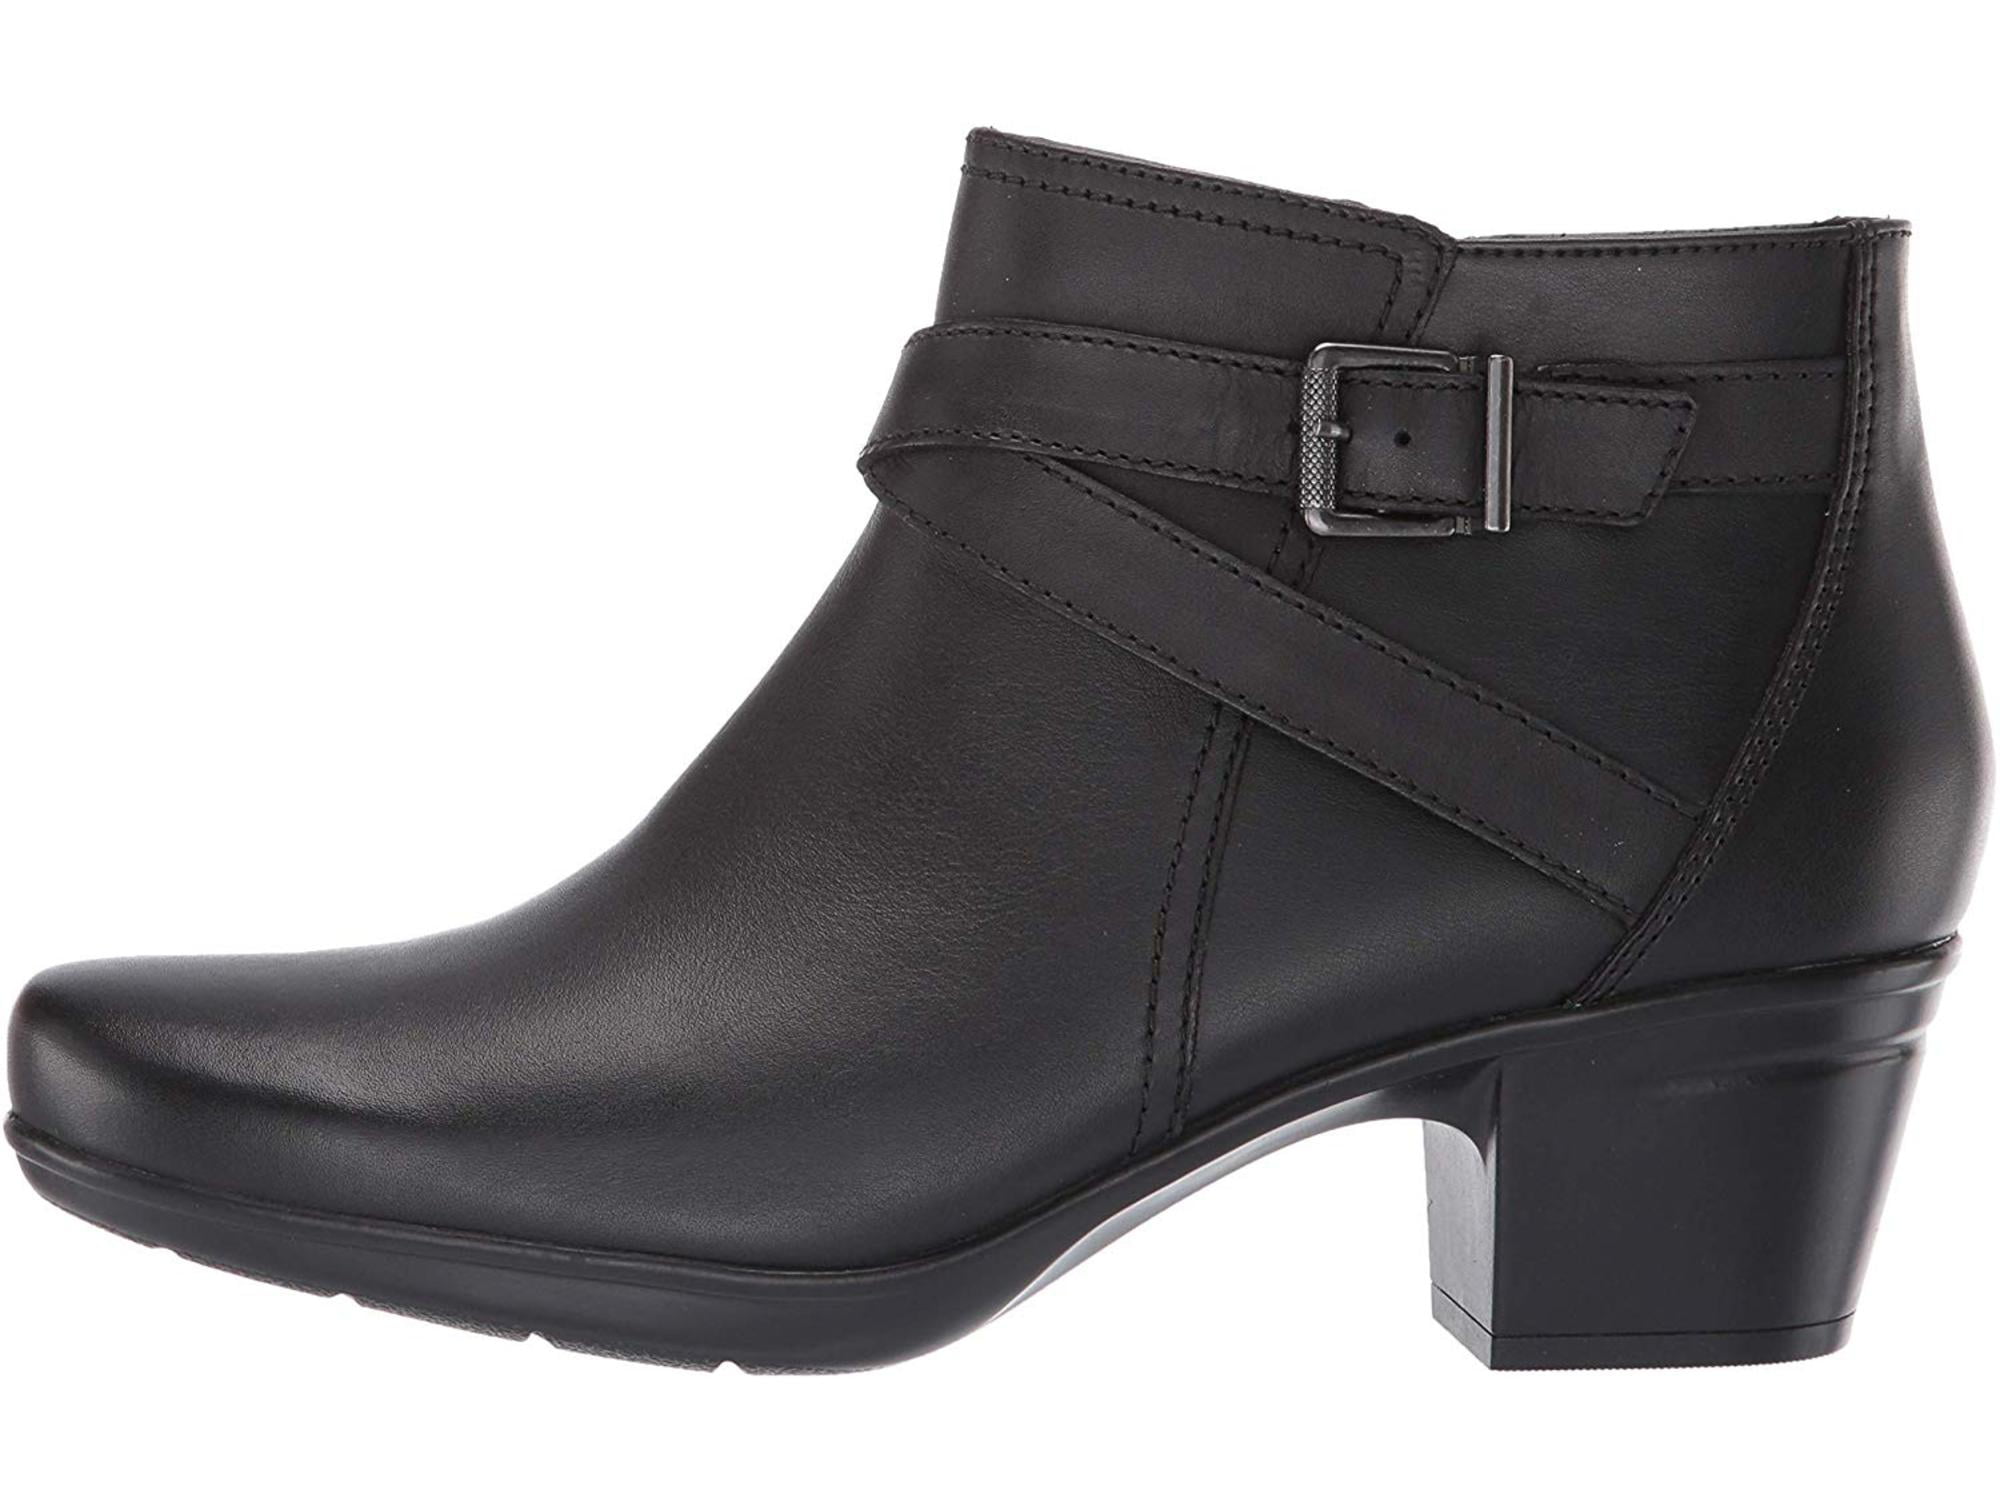 clarks ankle boots canada